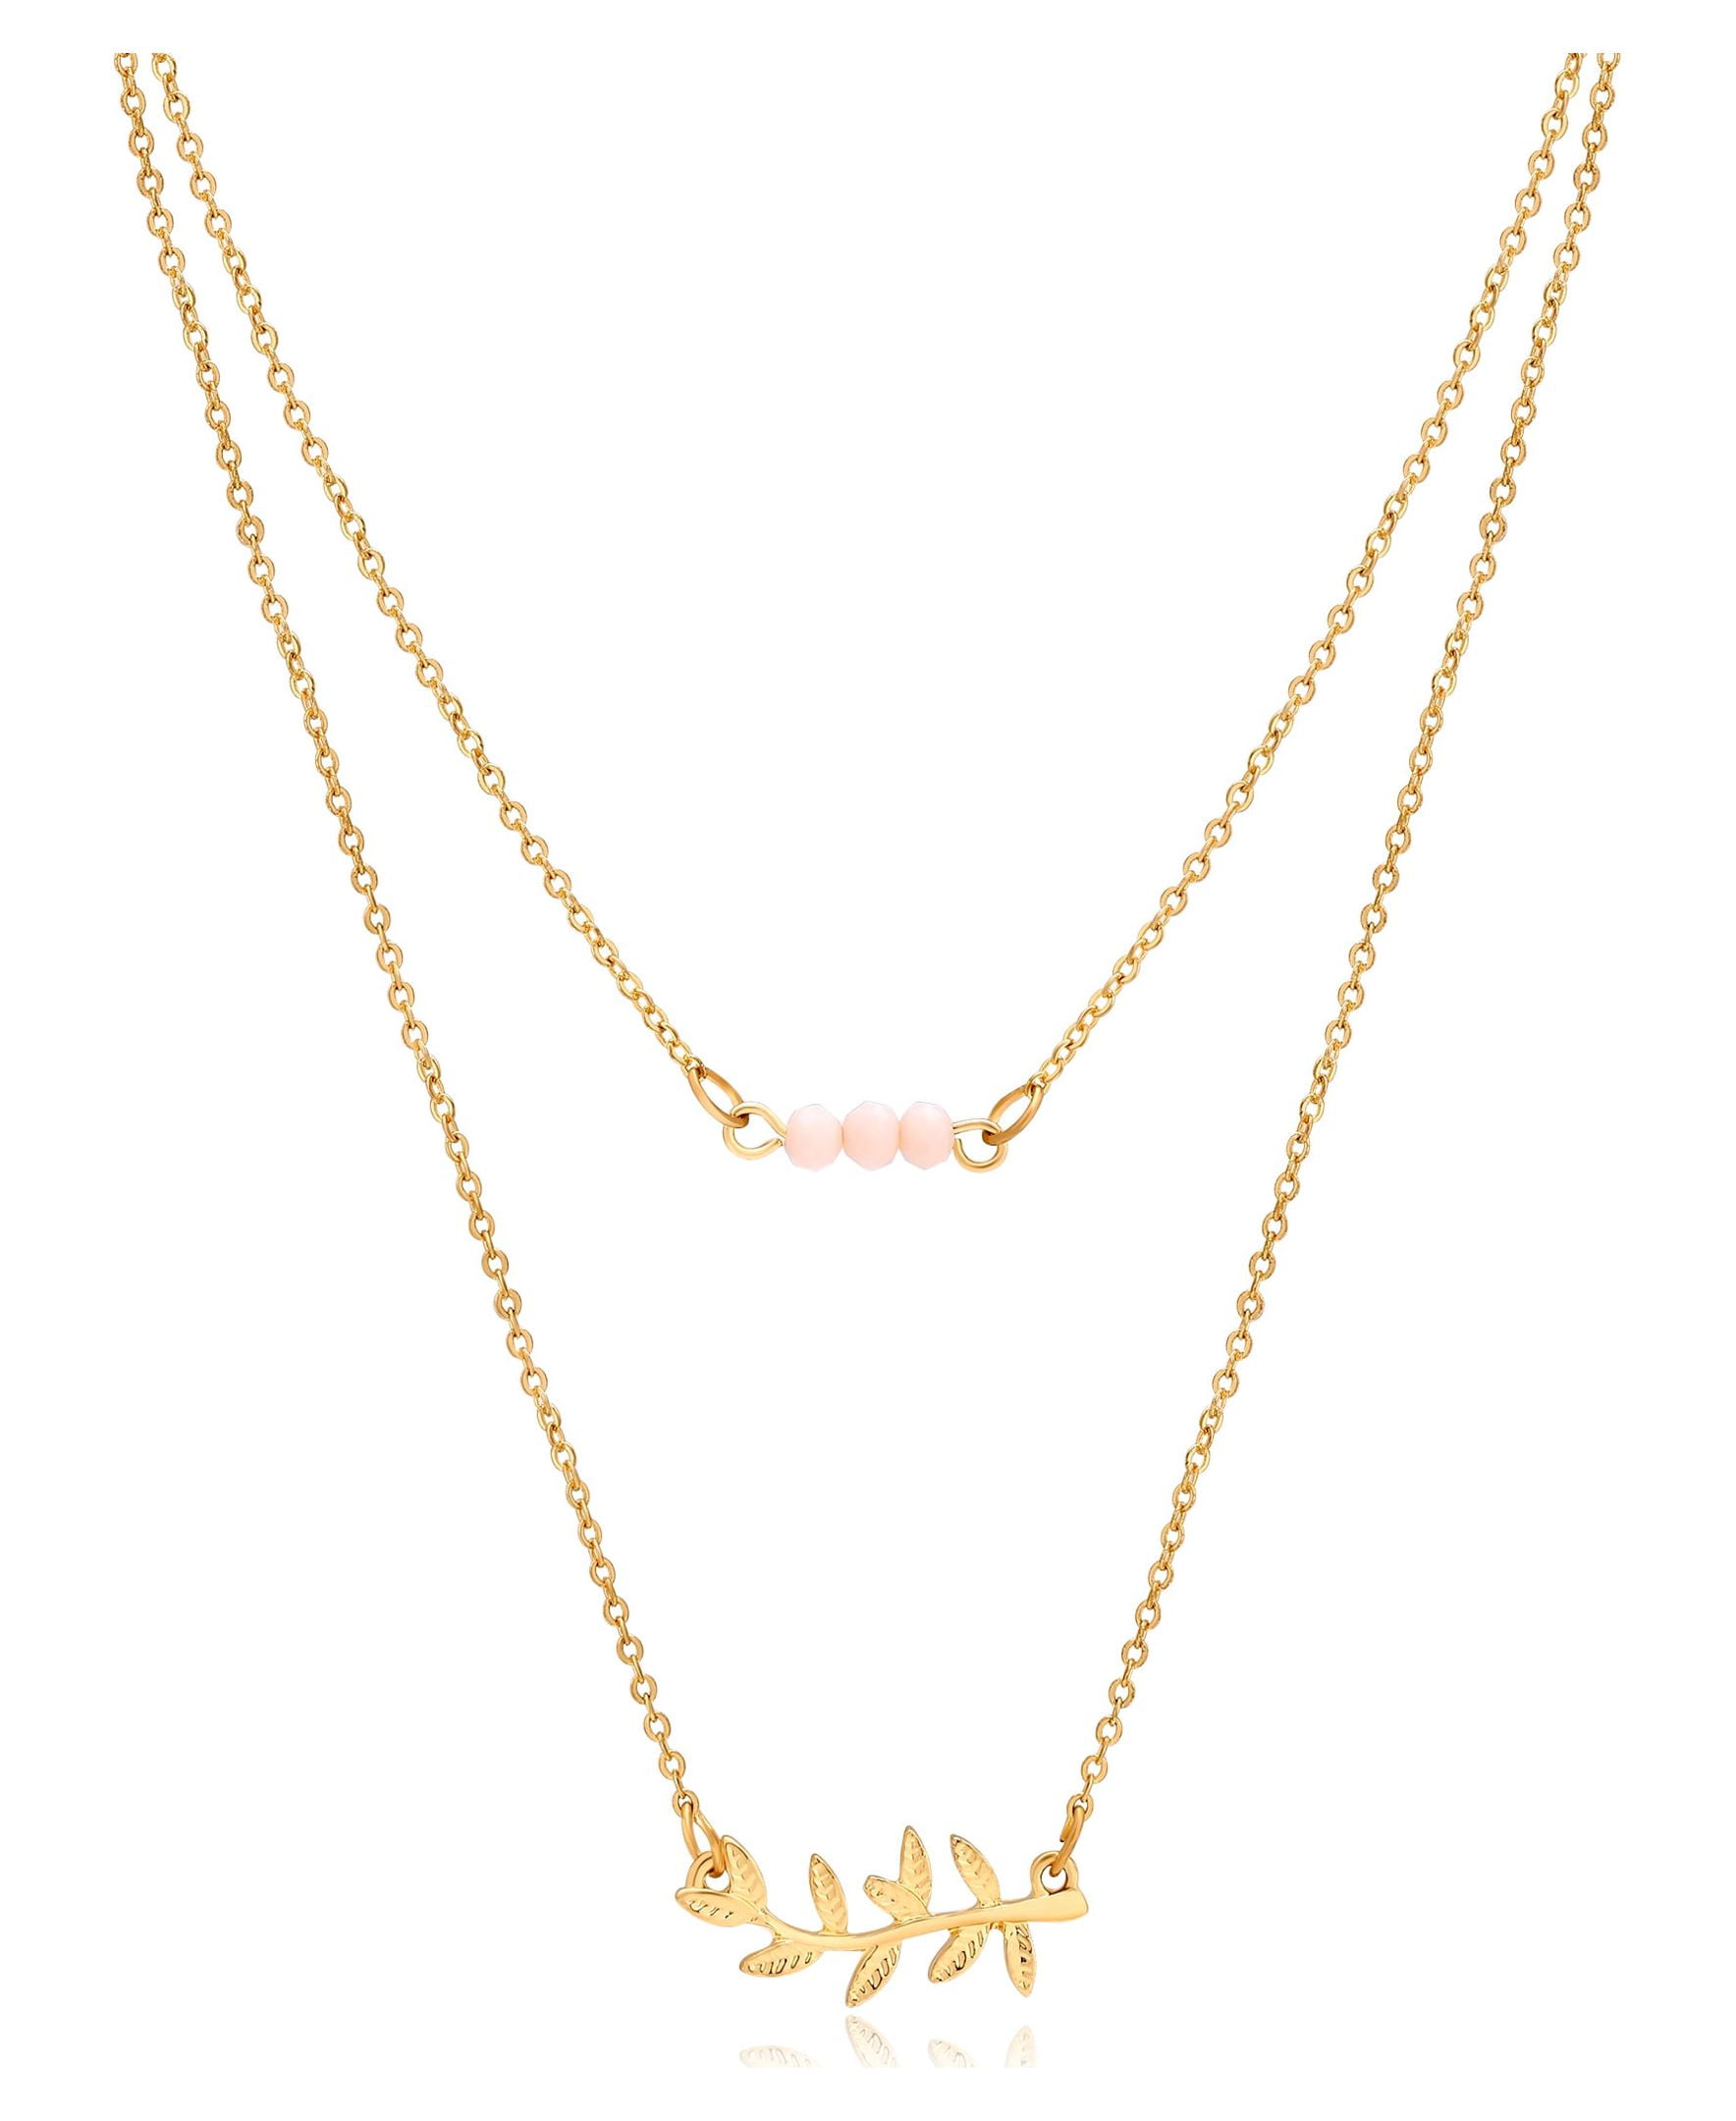 Yellow Gold Tone Layer Necklace Clasp for Up to 3 Necklaces by SuperJeweler